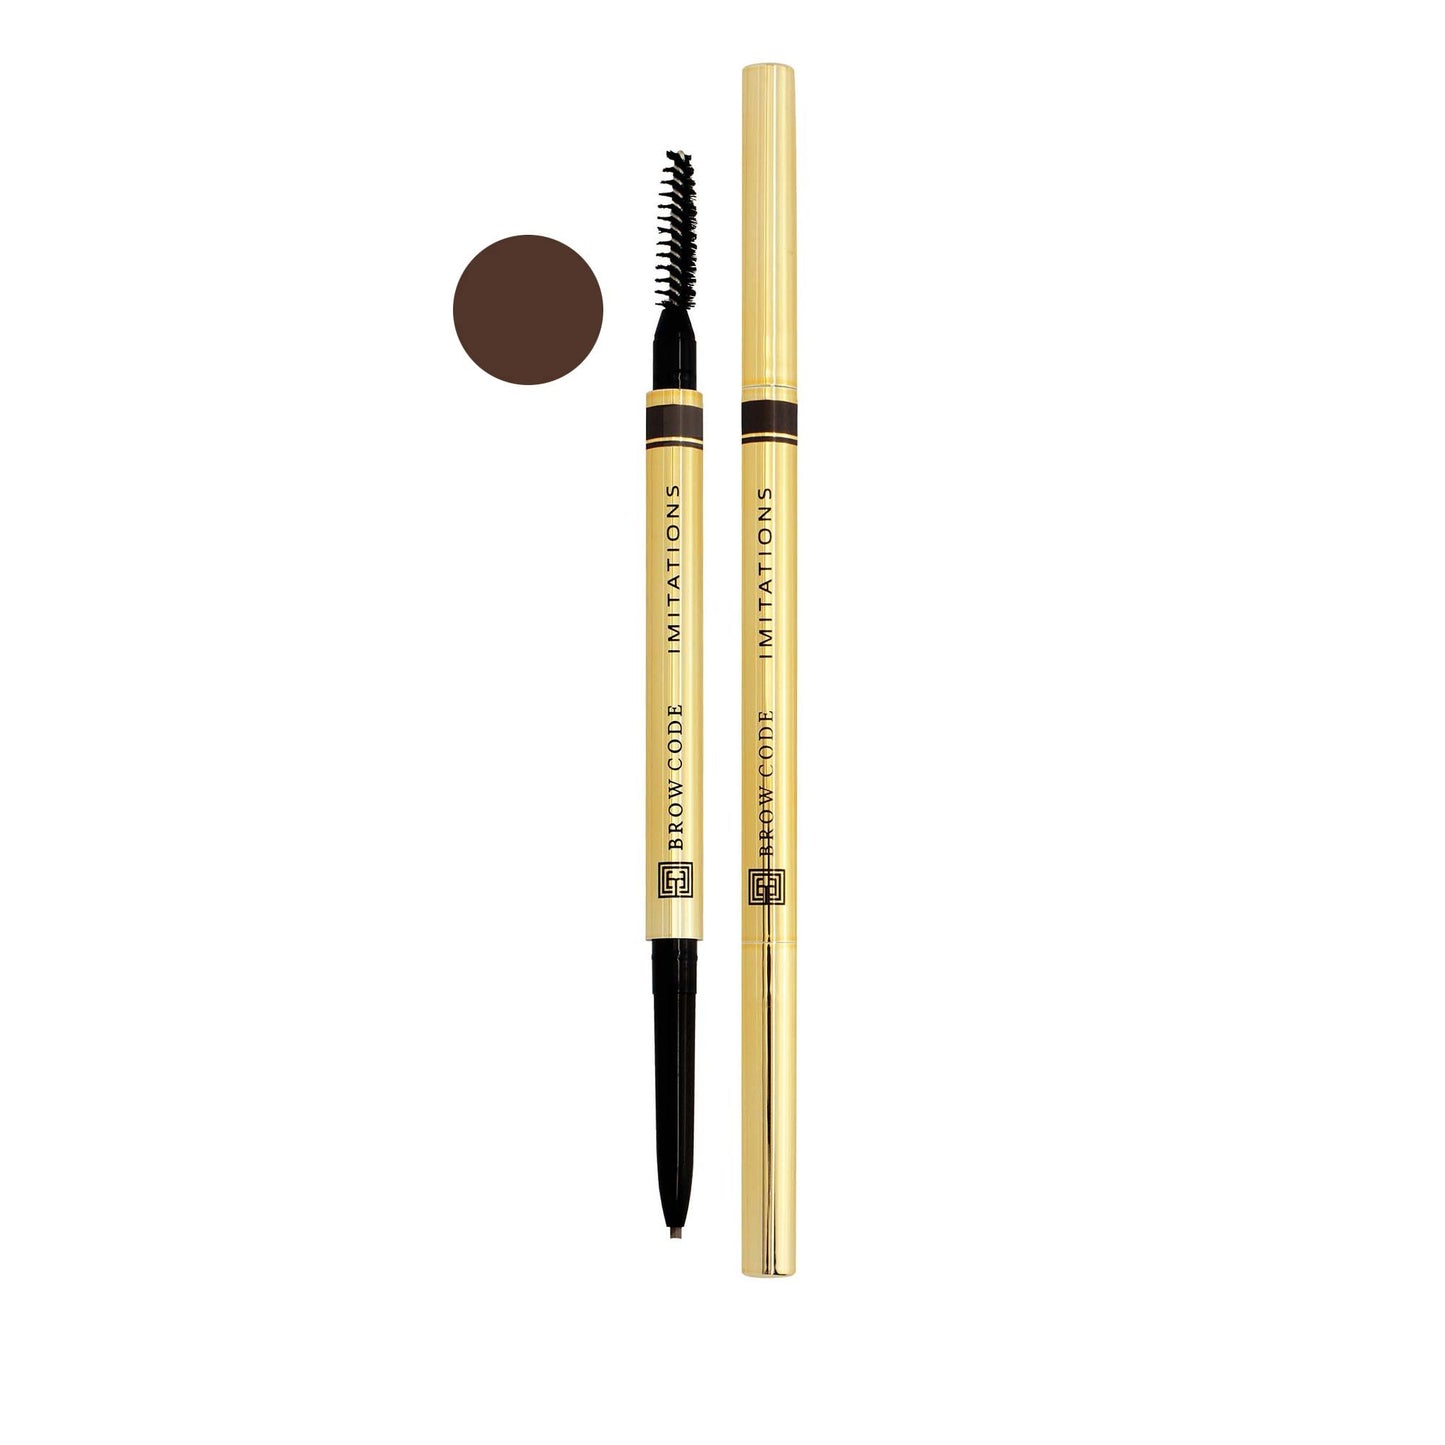 Imitations Micro Brow Pencil Color-Brunette - Natural Brown on a whote background